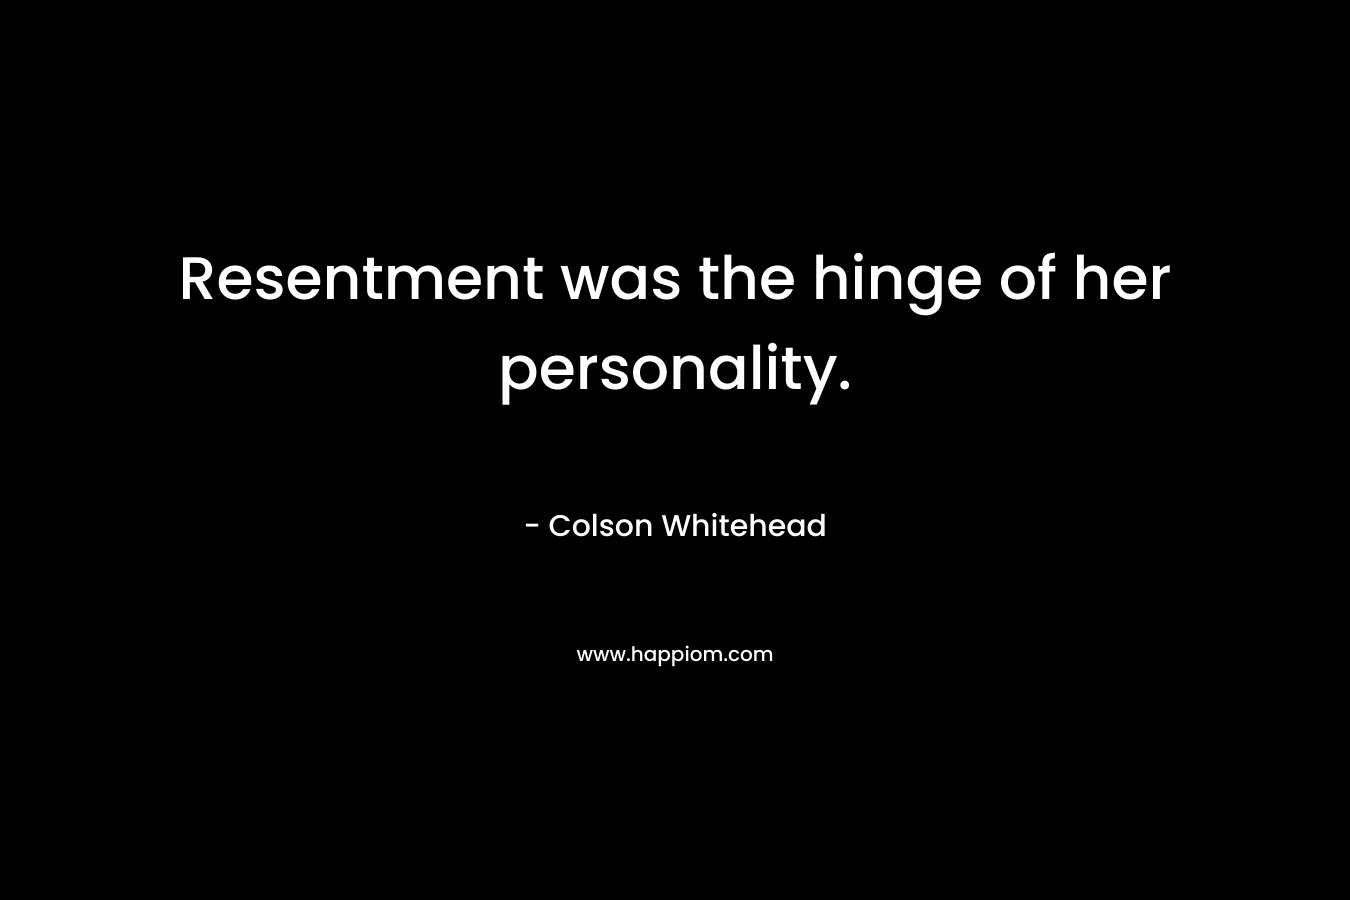 Resentment was the hinge of her personality. – Colson Whitehead